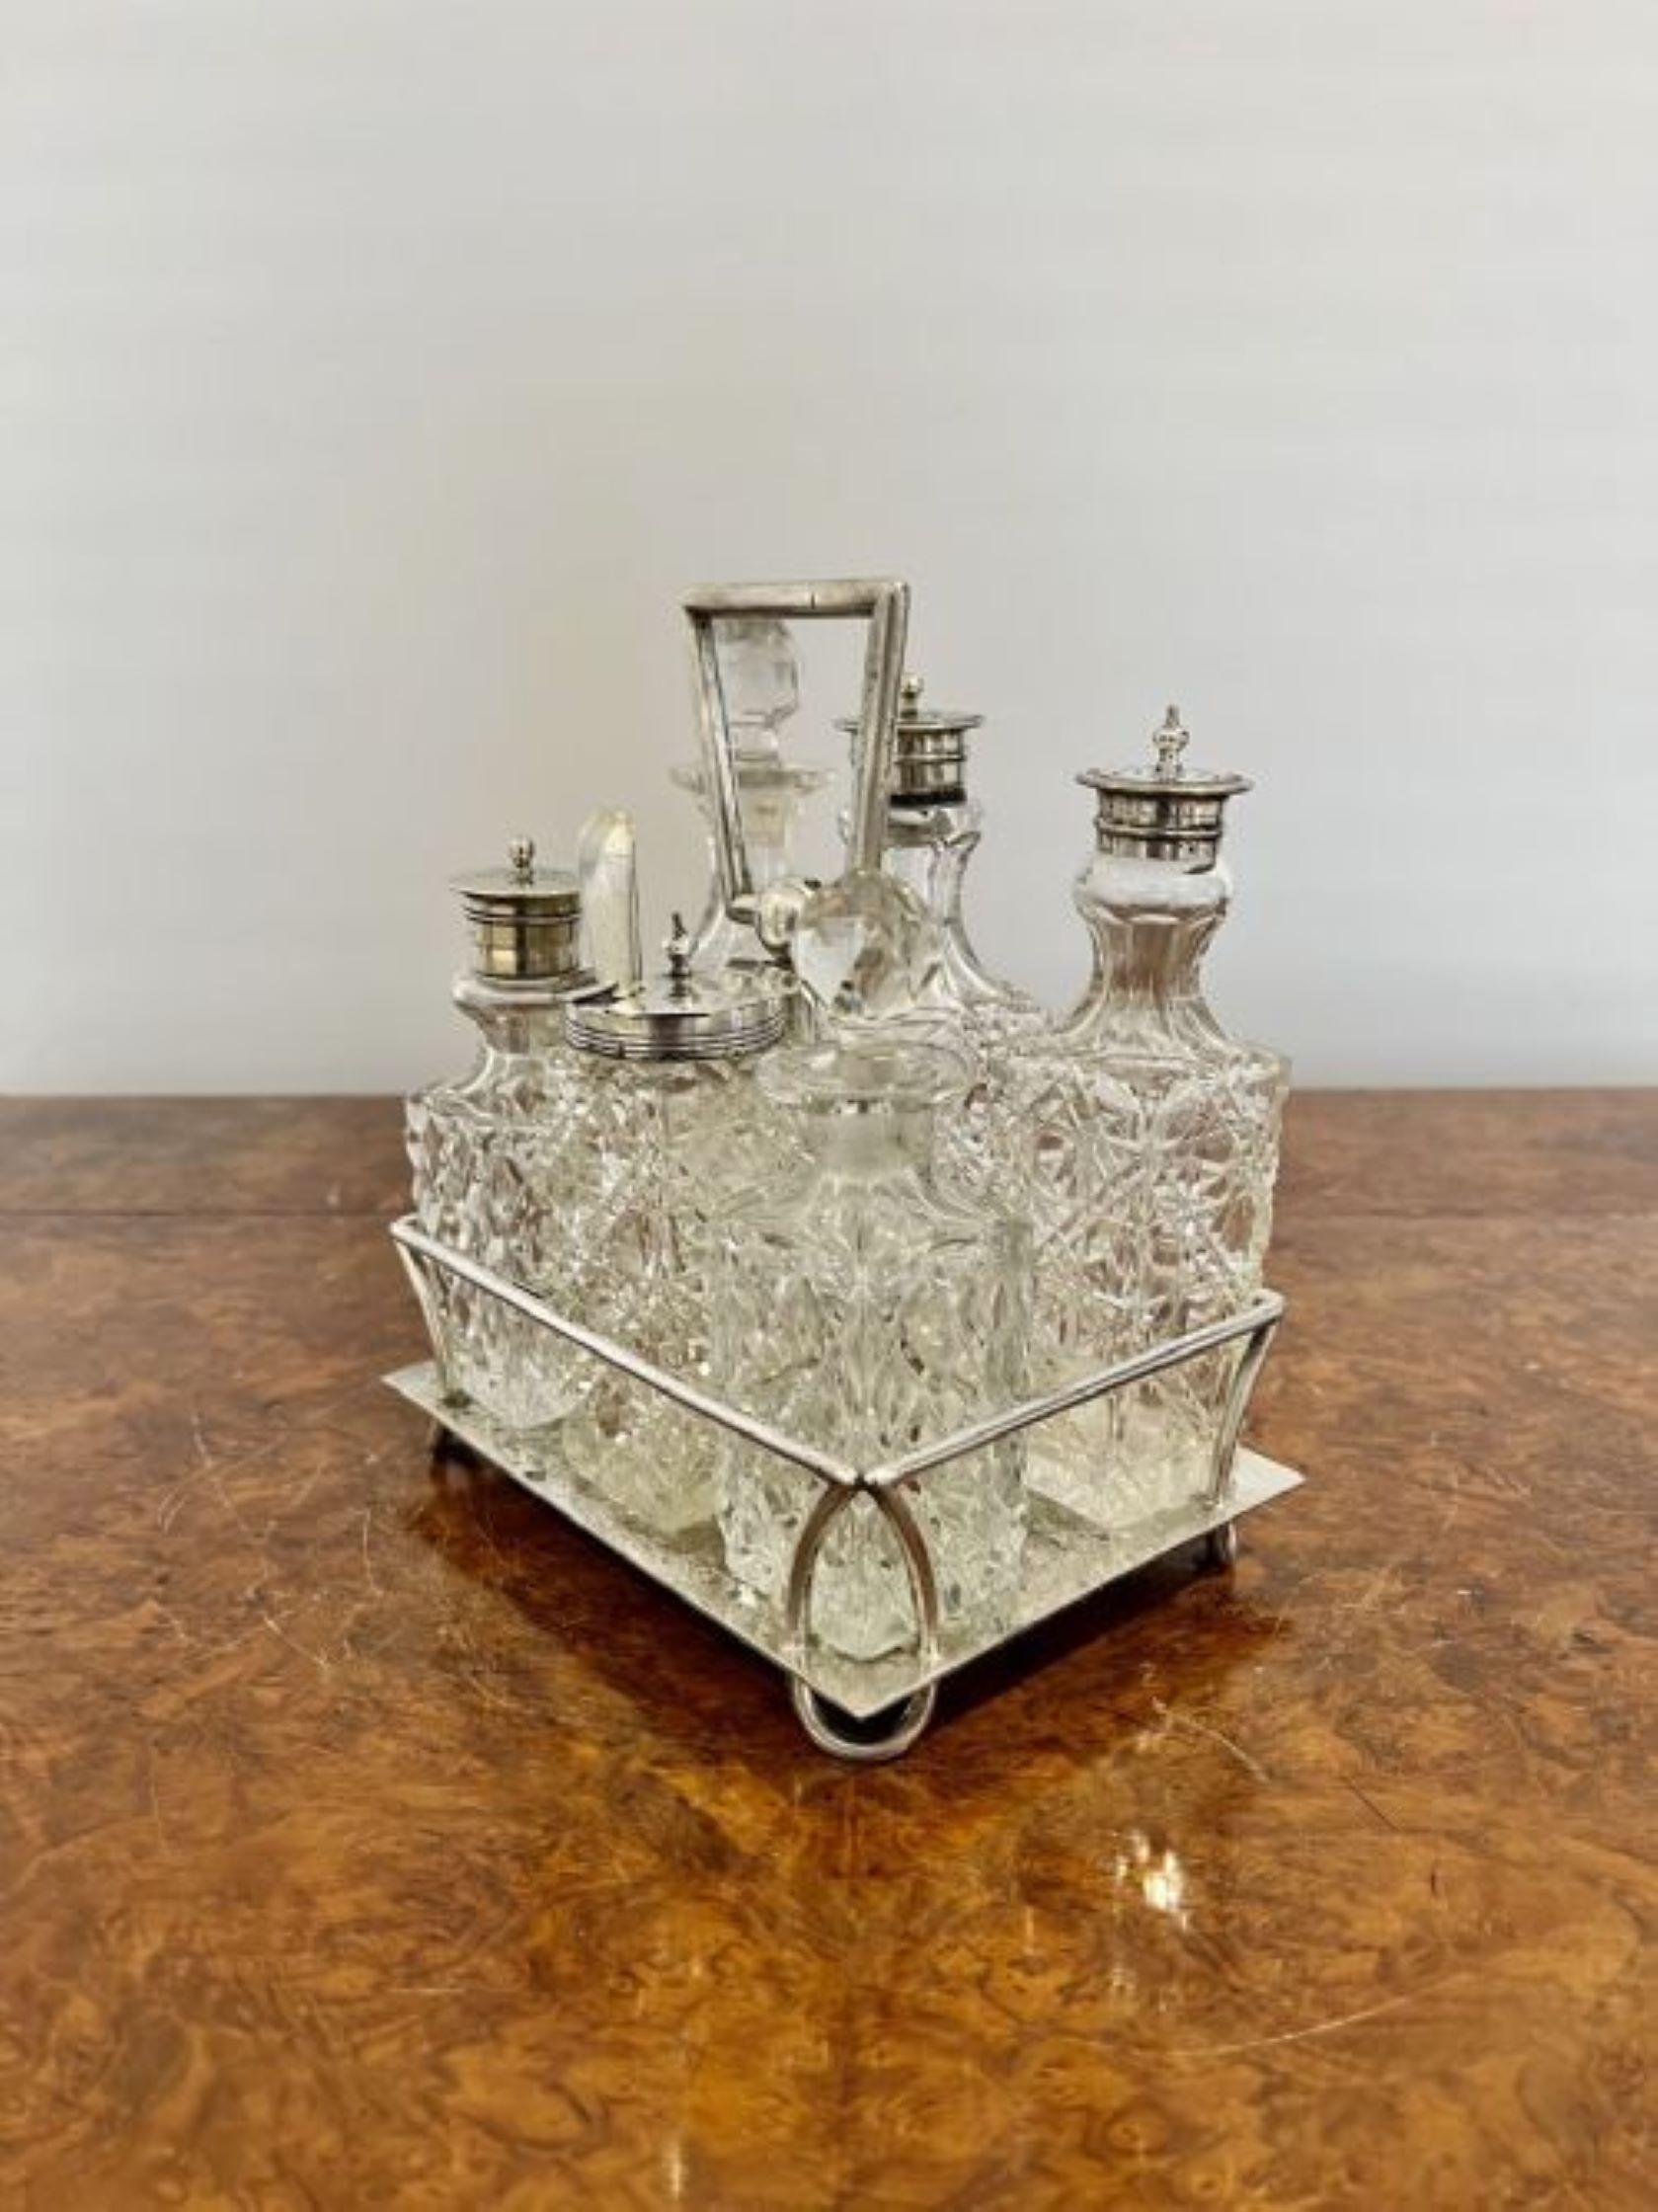 Antique Edwardian silver plated cruet set having a quality silver plated stand with a shaped handle with six original cut glass bottles with silver plated tops for salt, pepper, vinegar, mustard and oils.
